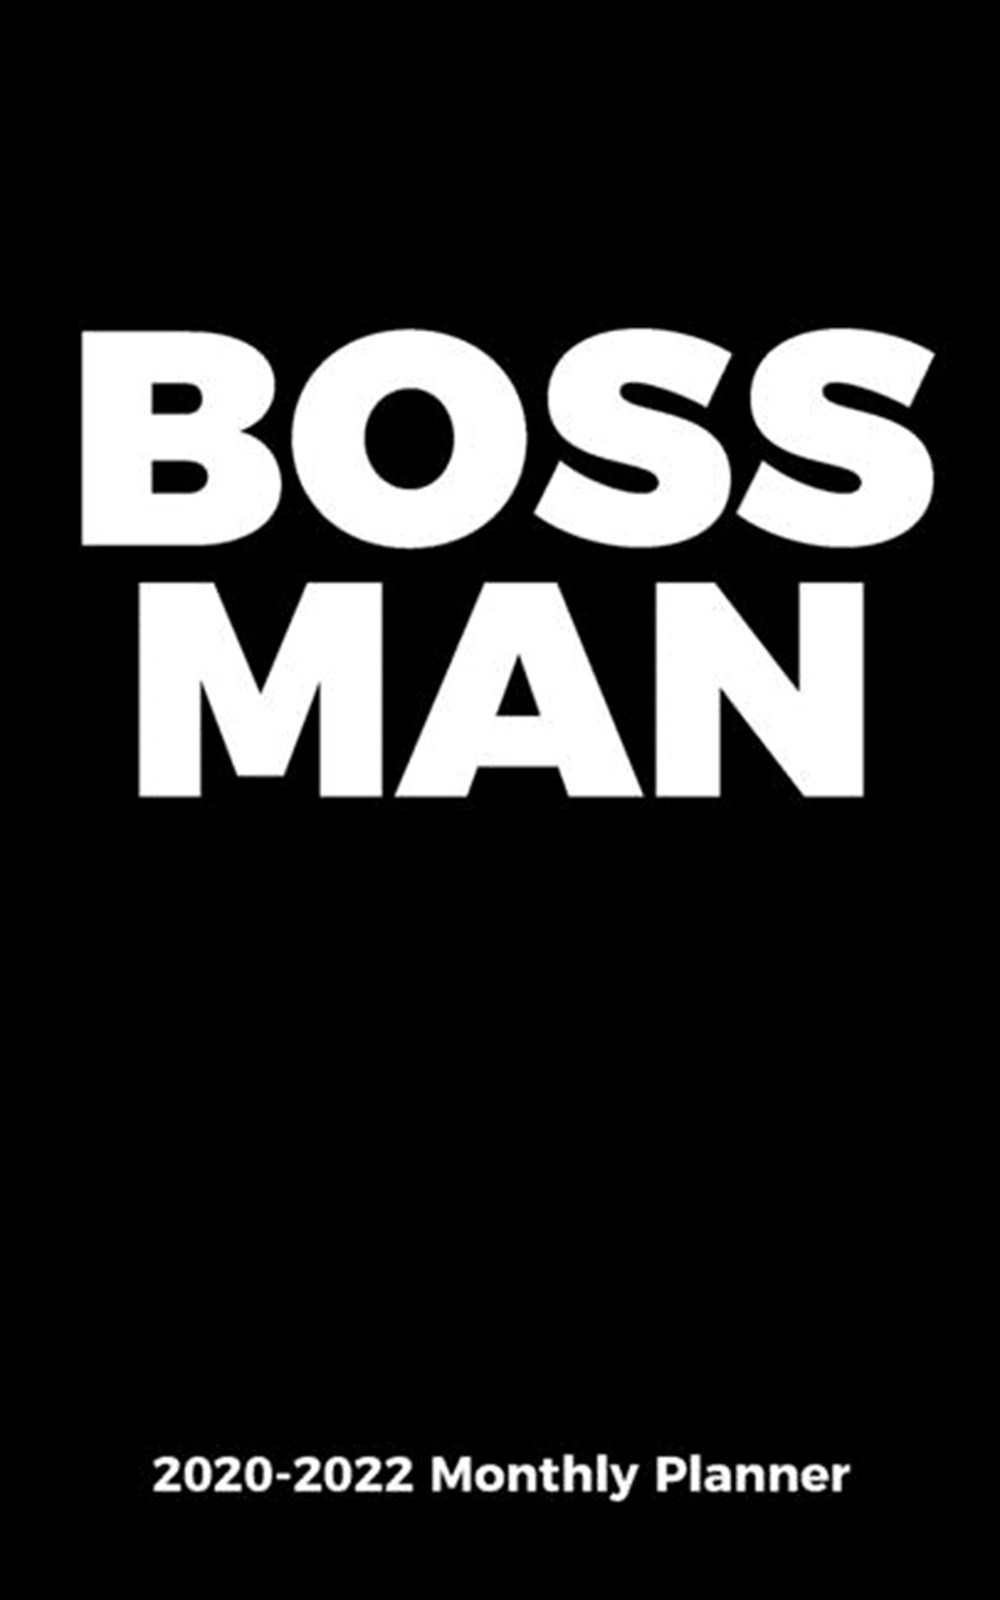 BOSS MAN - 2020-2022 Monthly Planner for Professionals, Executives, and Entrepreneurs Three Year App